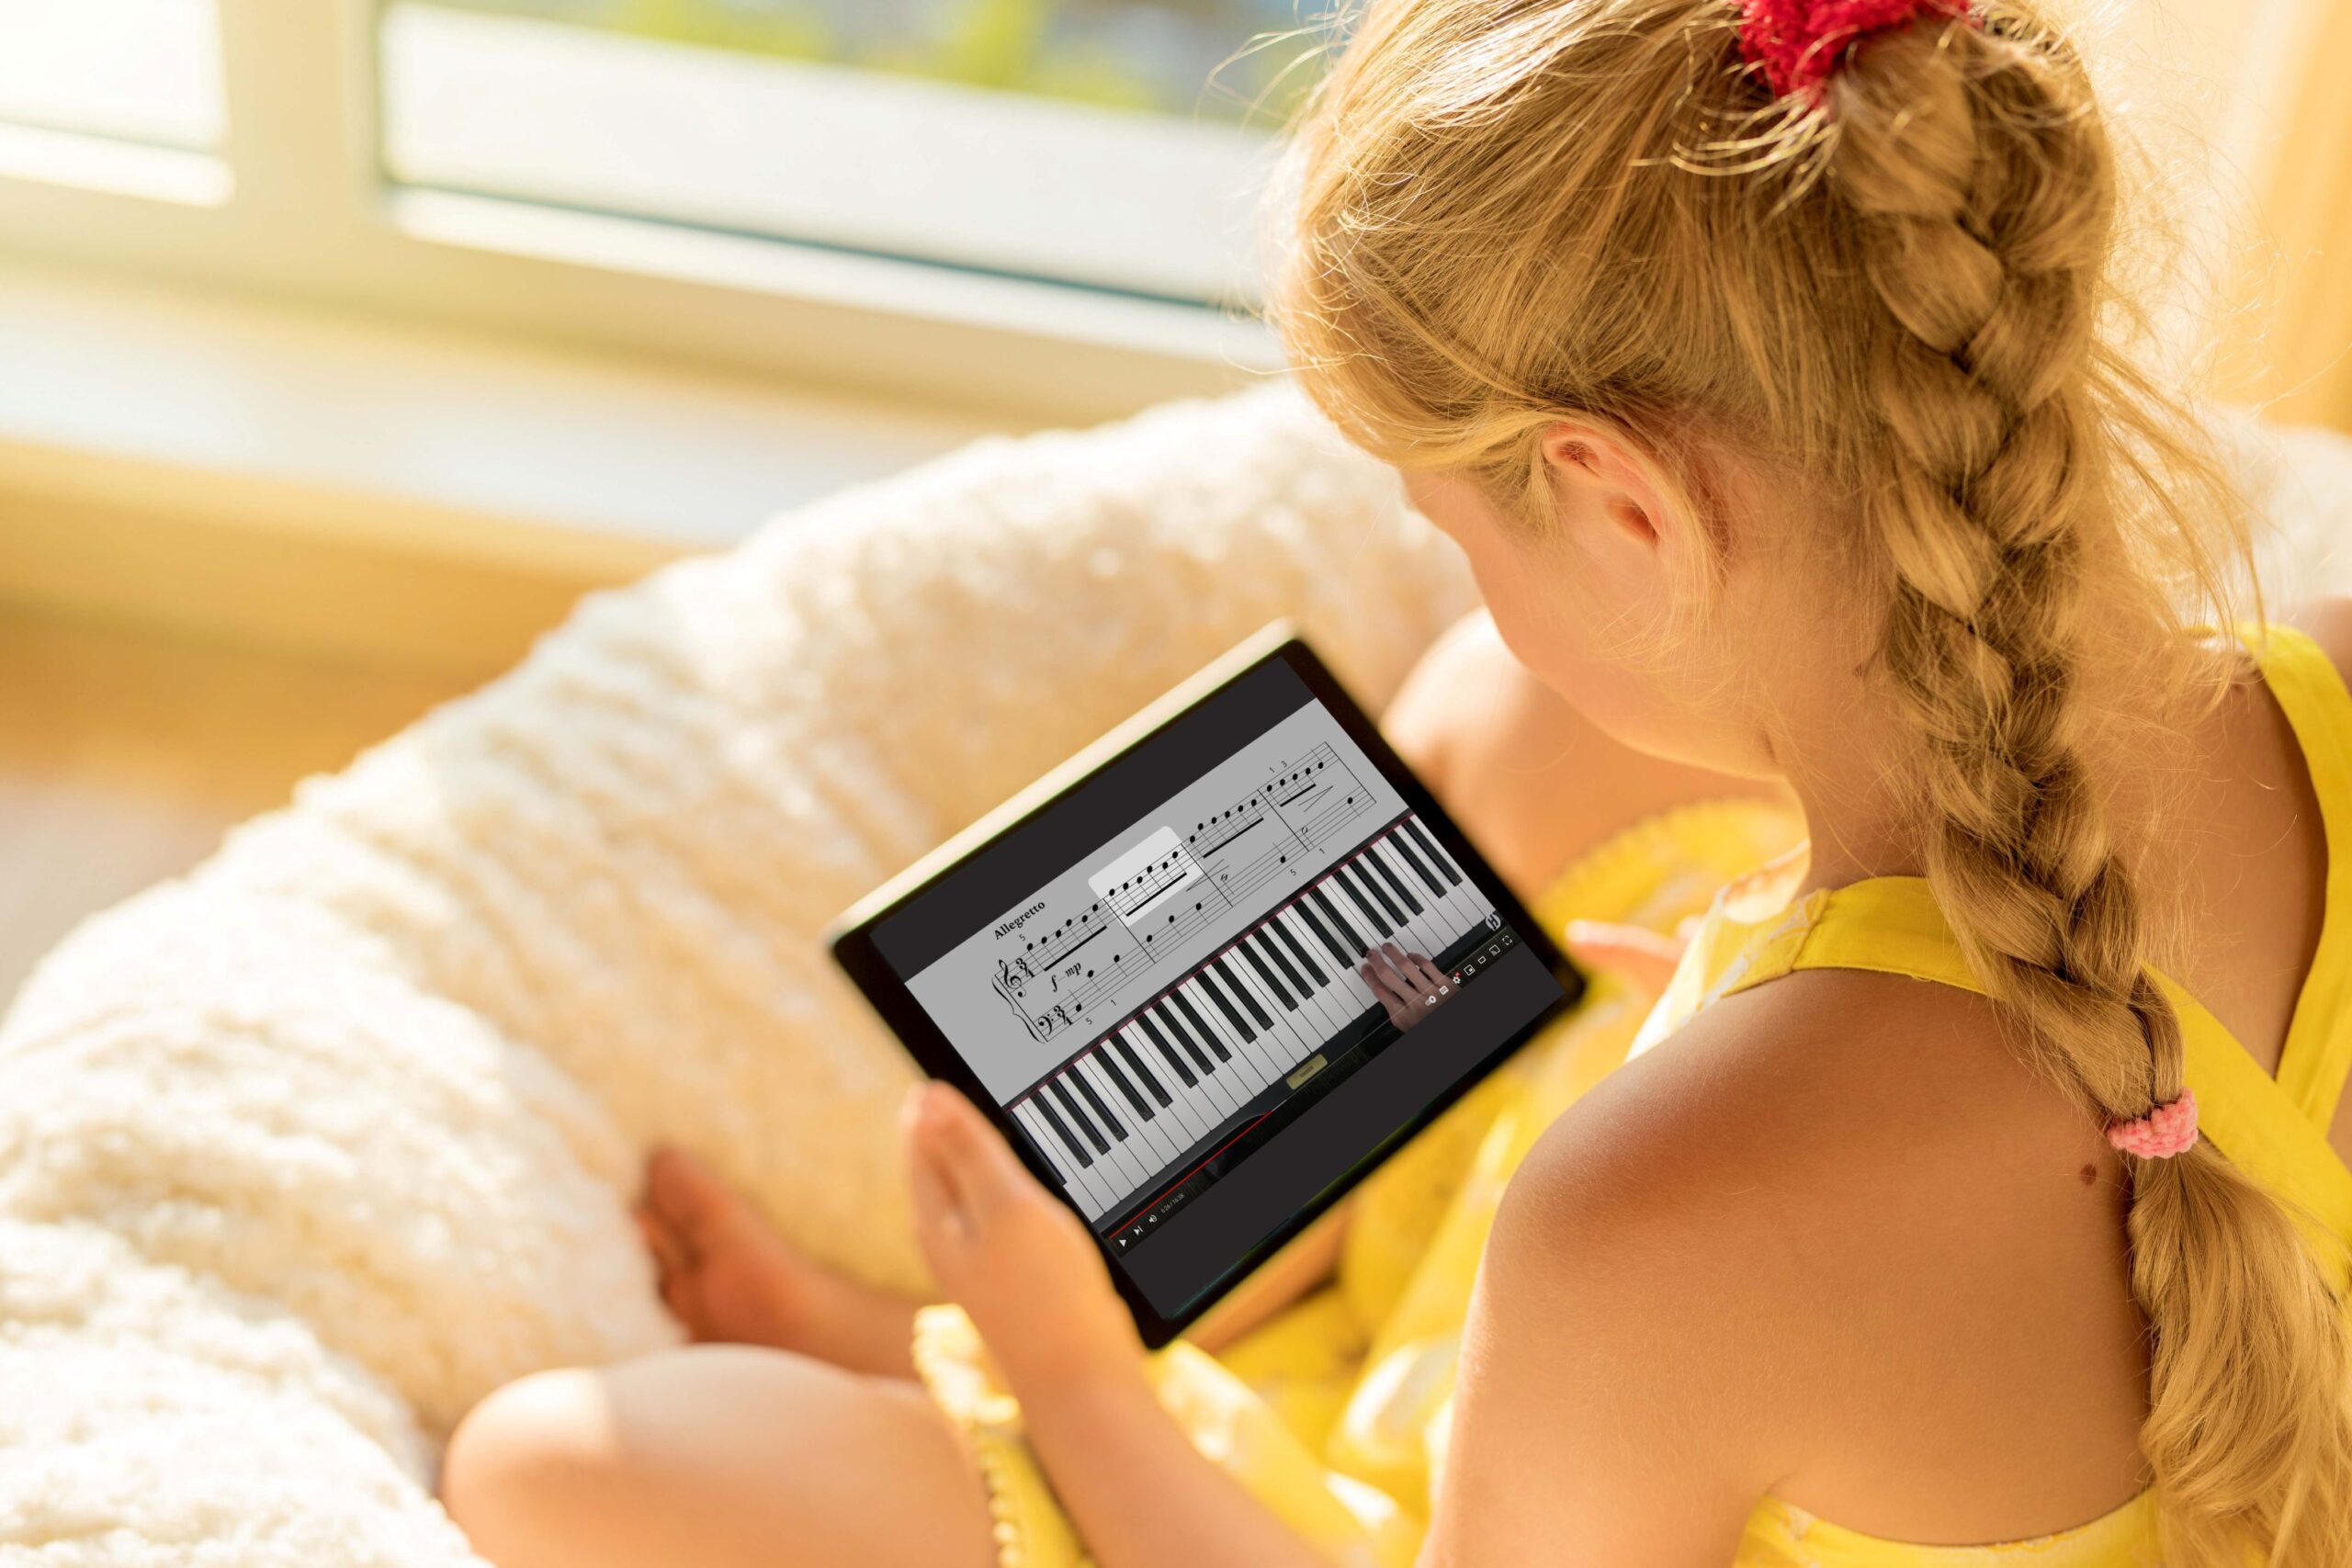 The best piano learning app.